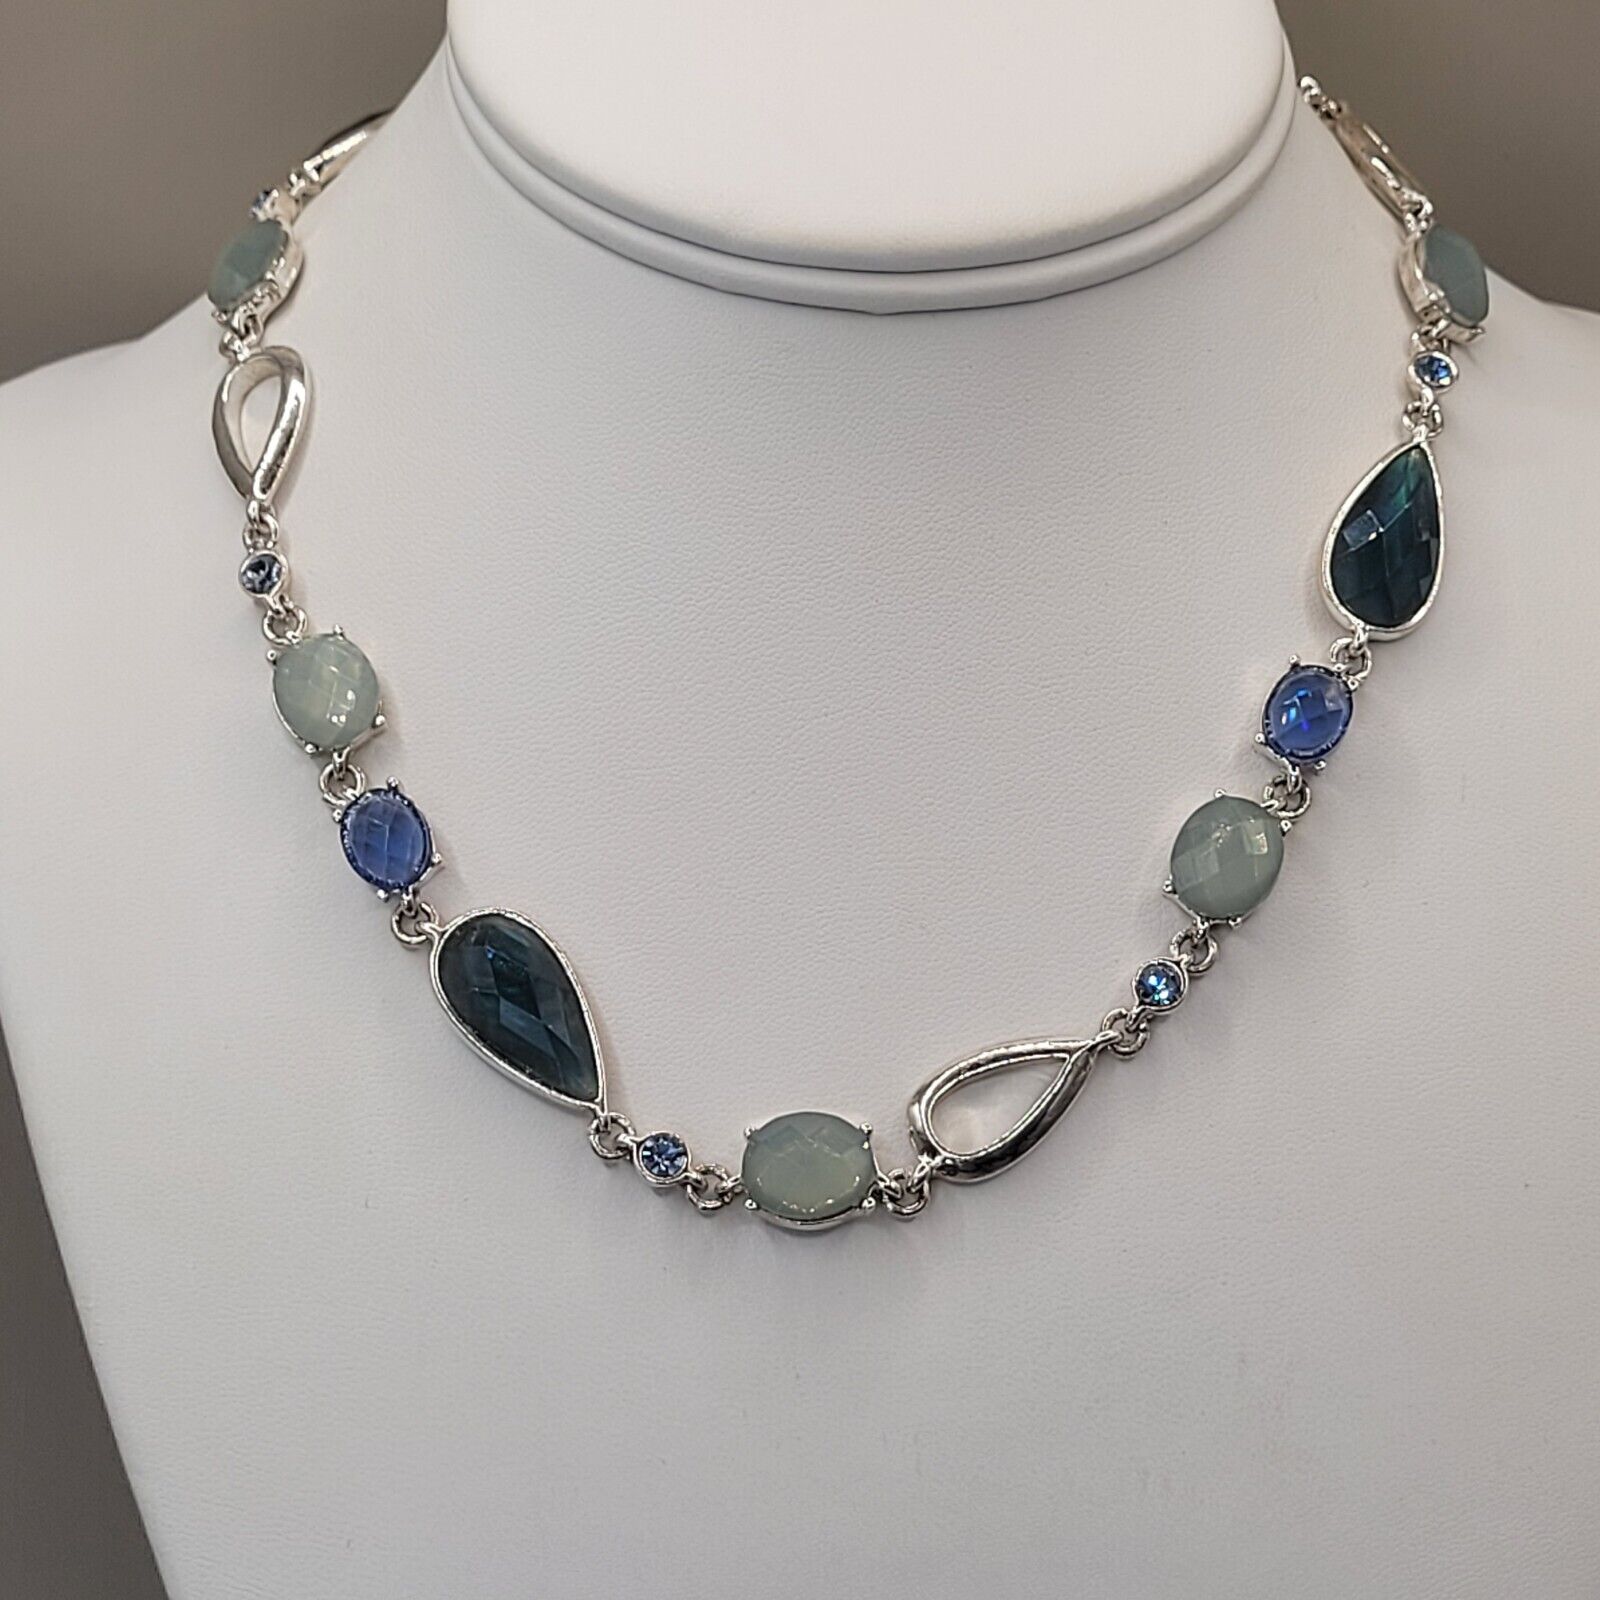 Vintage Anne Klein Beaded Blue And Silver Tone Necklace (B)